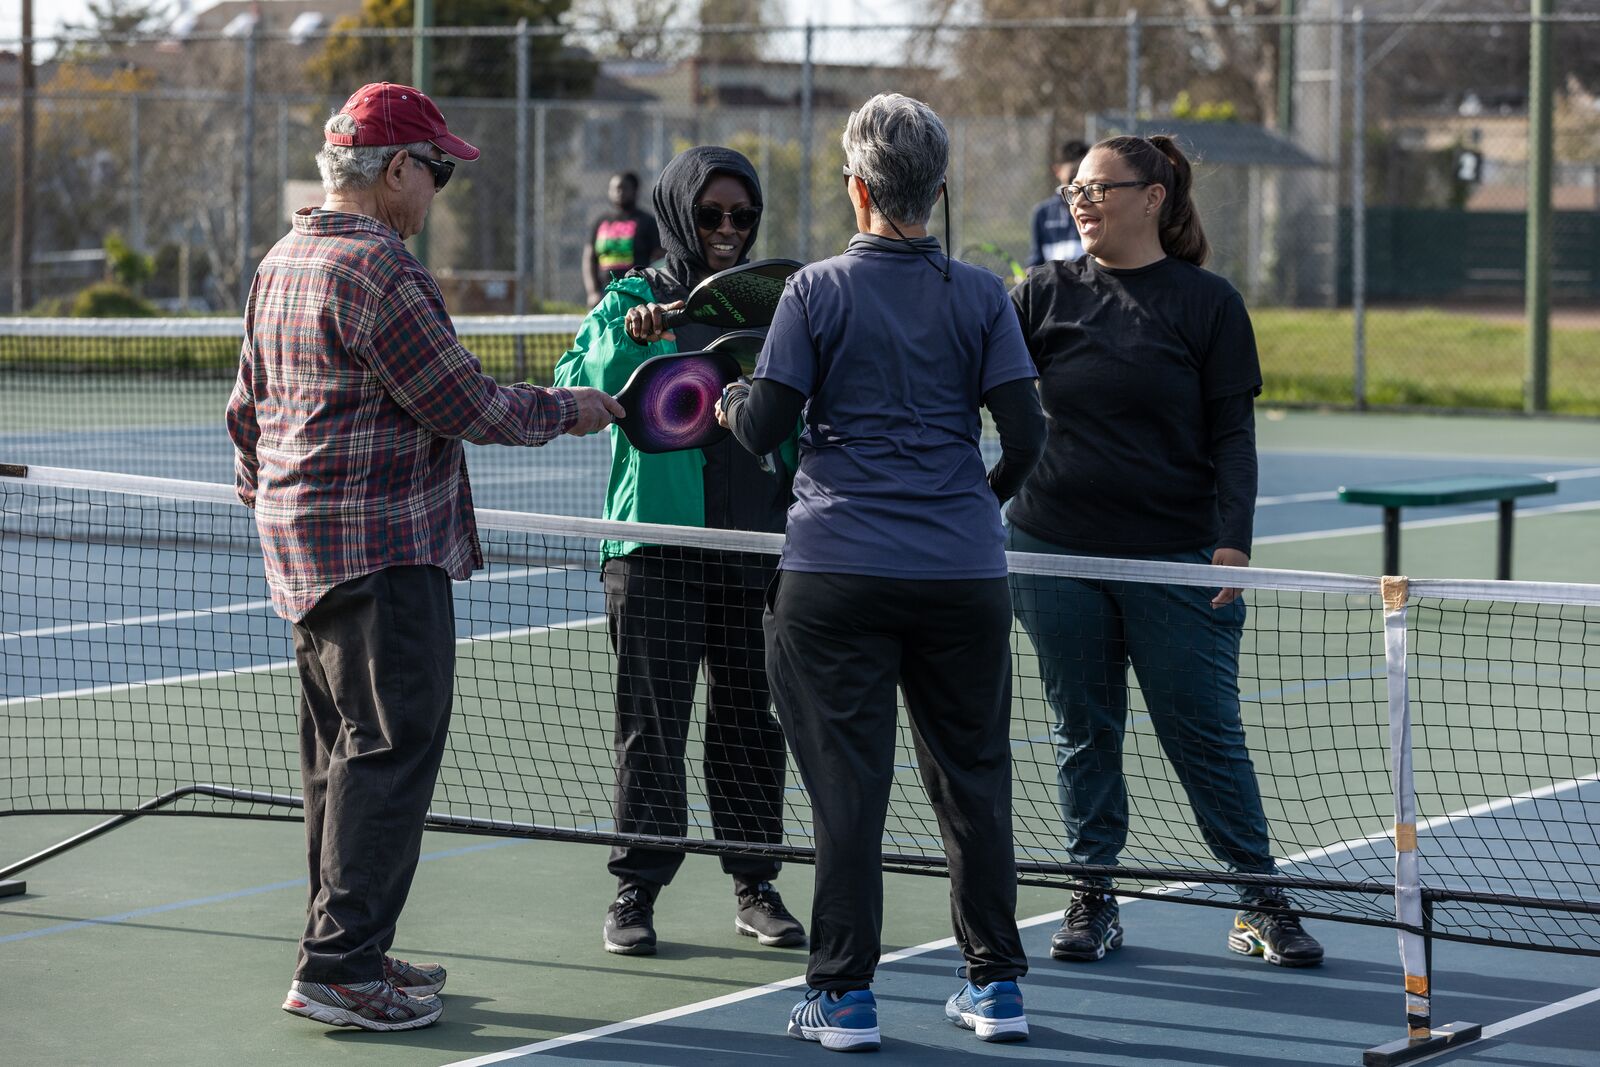 Four people tapping paddles over the net at the center of a court.